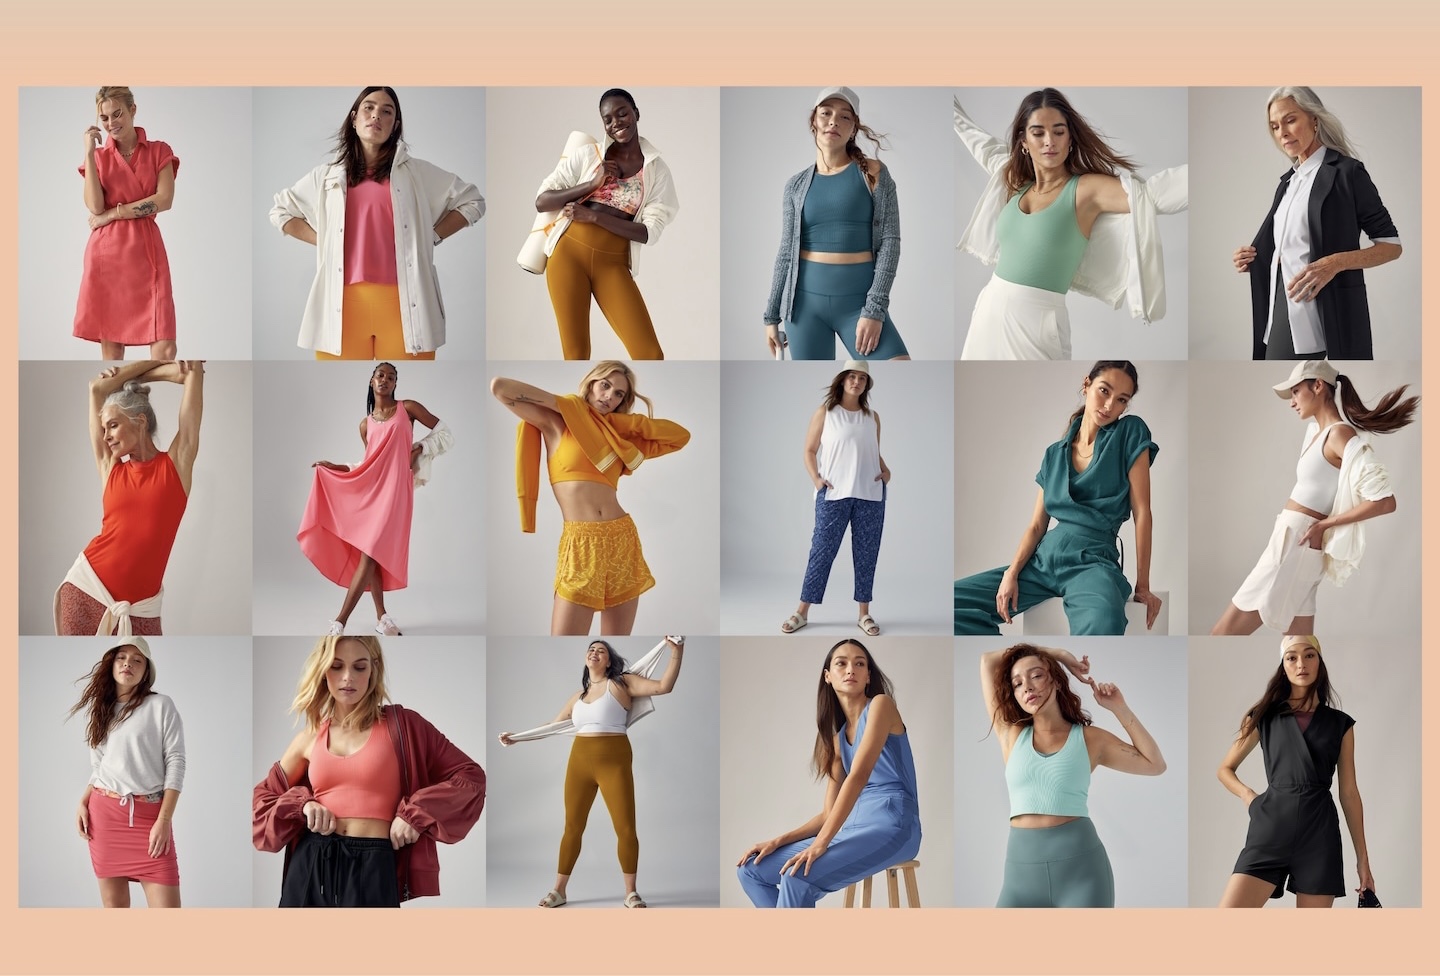 Big news! Athleta is now in the Exchange. A brand designed with women, for  women. At Athleta, our mission is to ignite the limitless po